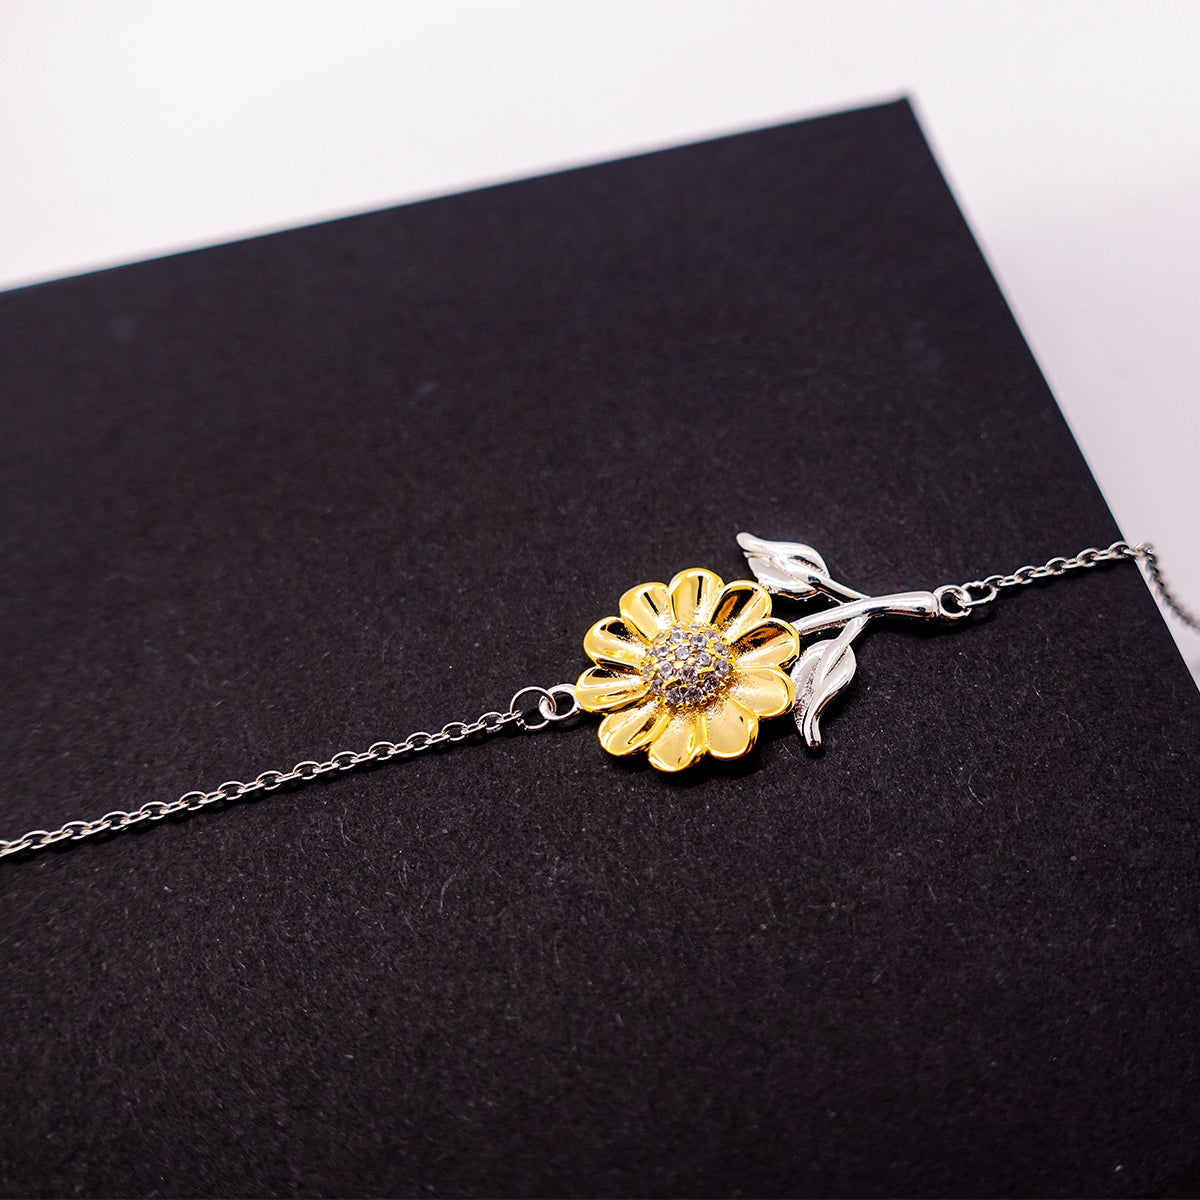 Godson Motivational Gifts from Godmother, Remember to never give up no matter what, Inspirational Birthday Sunflower Bracelet for Godson